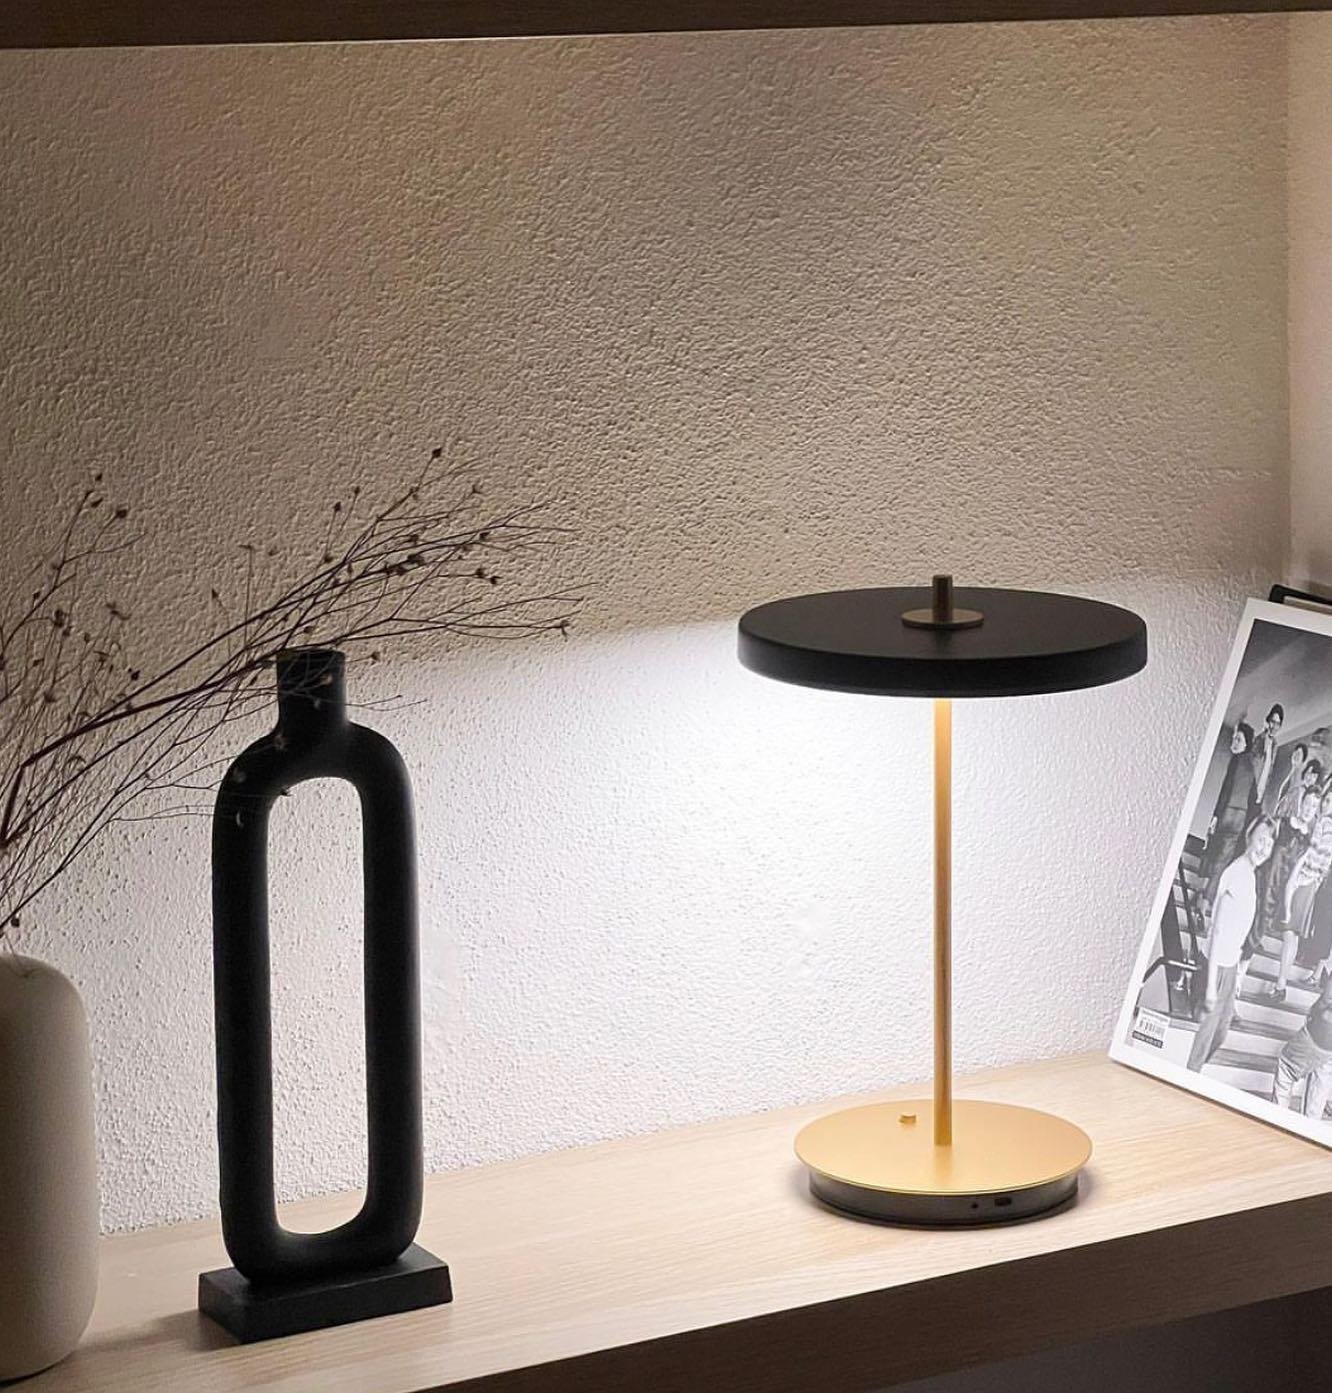 Trend alert: Mini lights for shelves or any other tight spots. The first one featured is rechargeable.